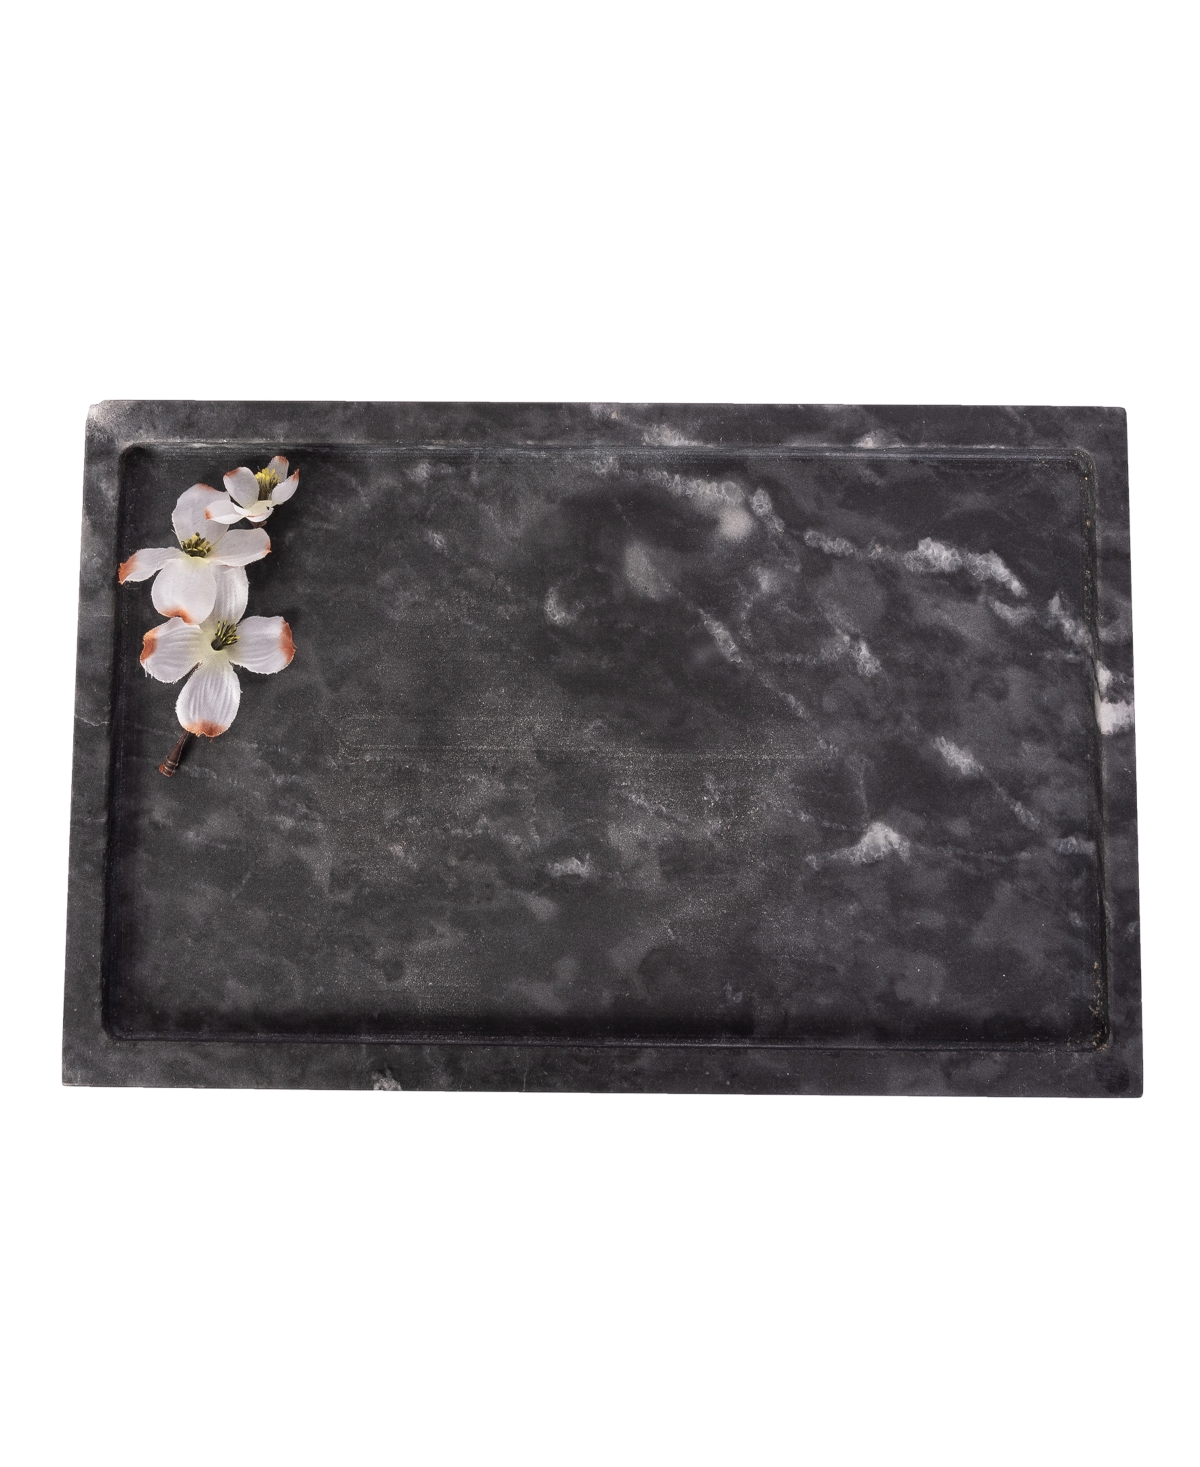 Artifacts Trading Company Marble Rectangular Tray, 15" X 8" X 0.3" In Black Matte